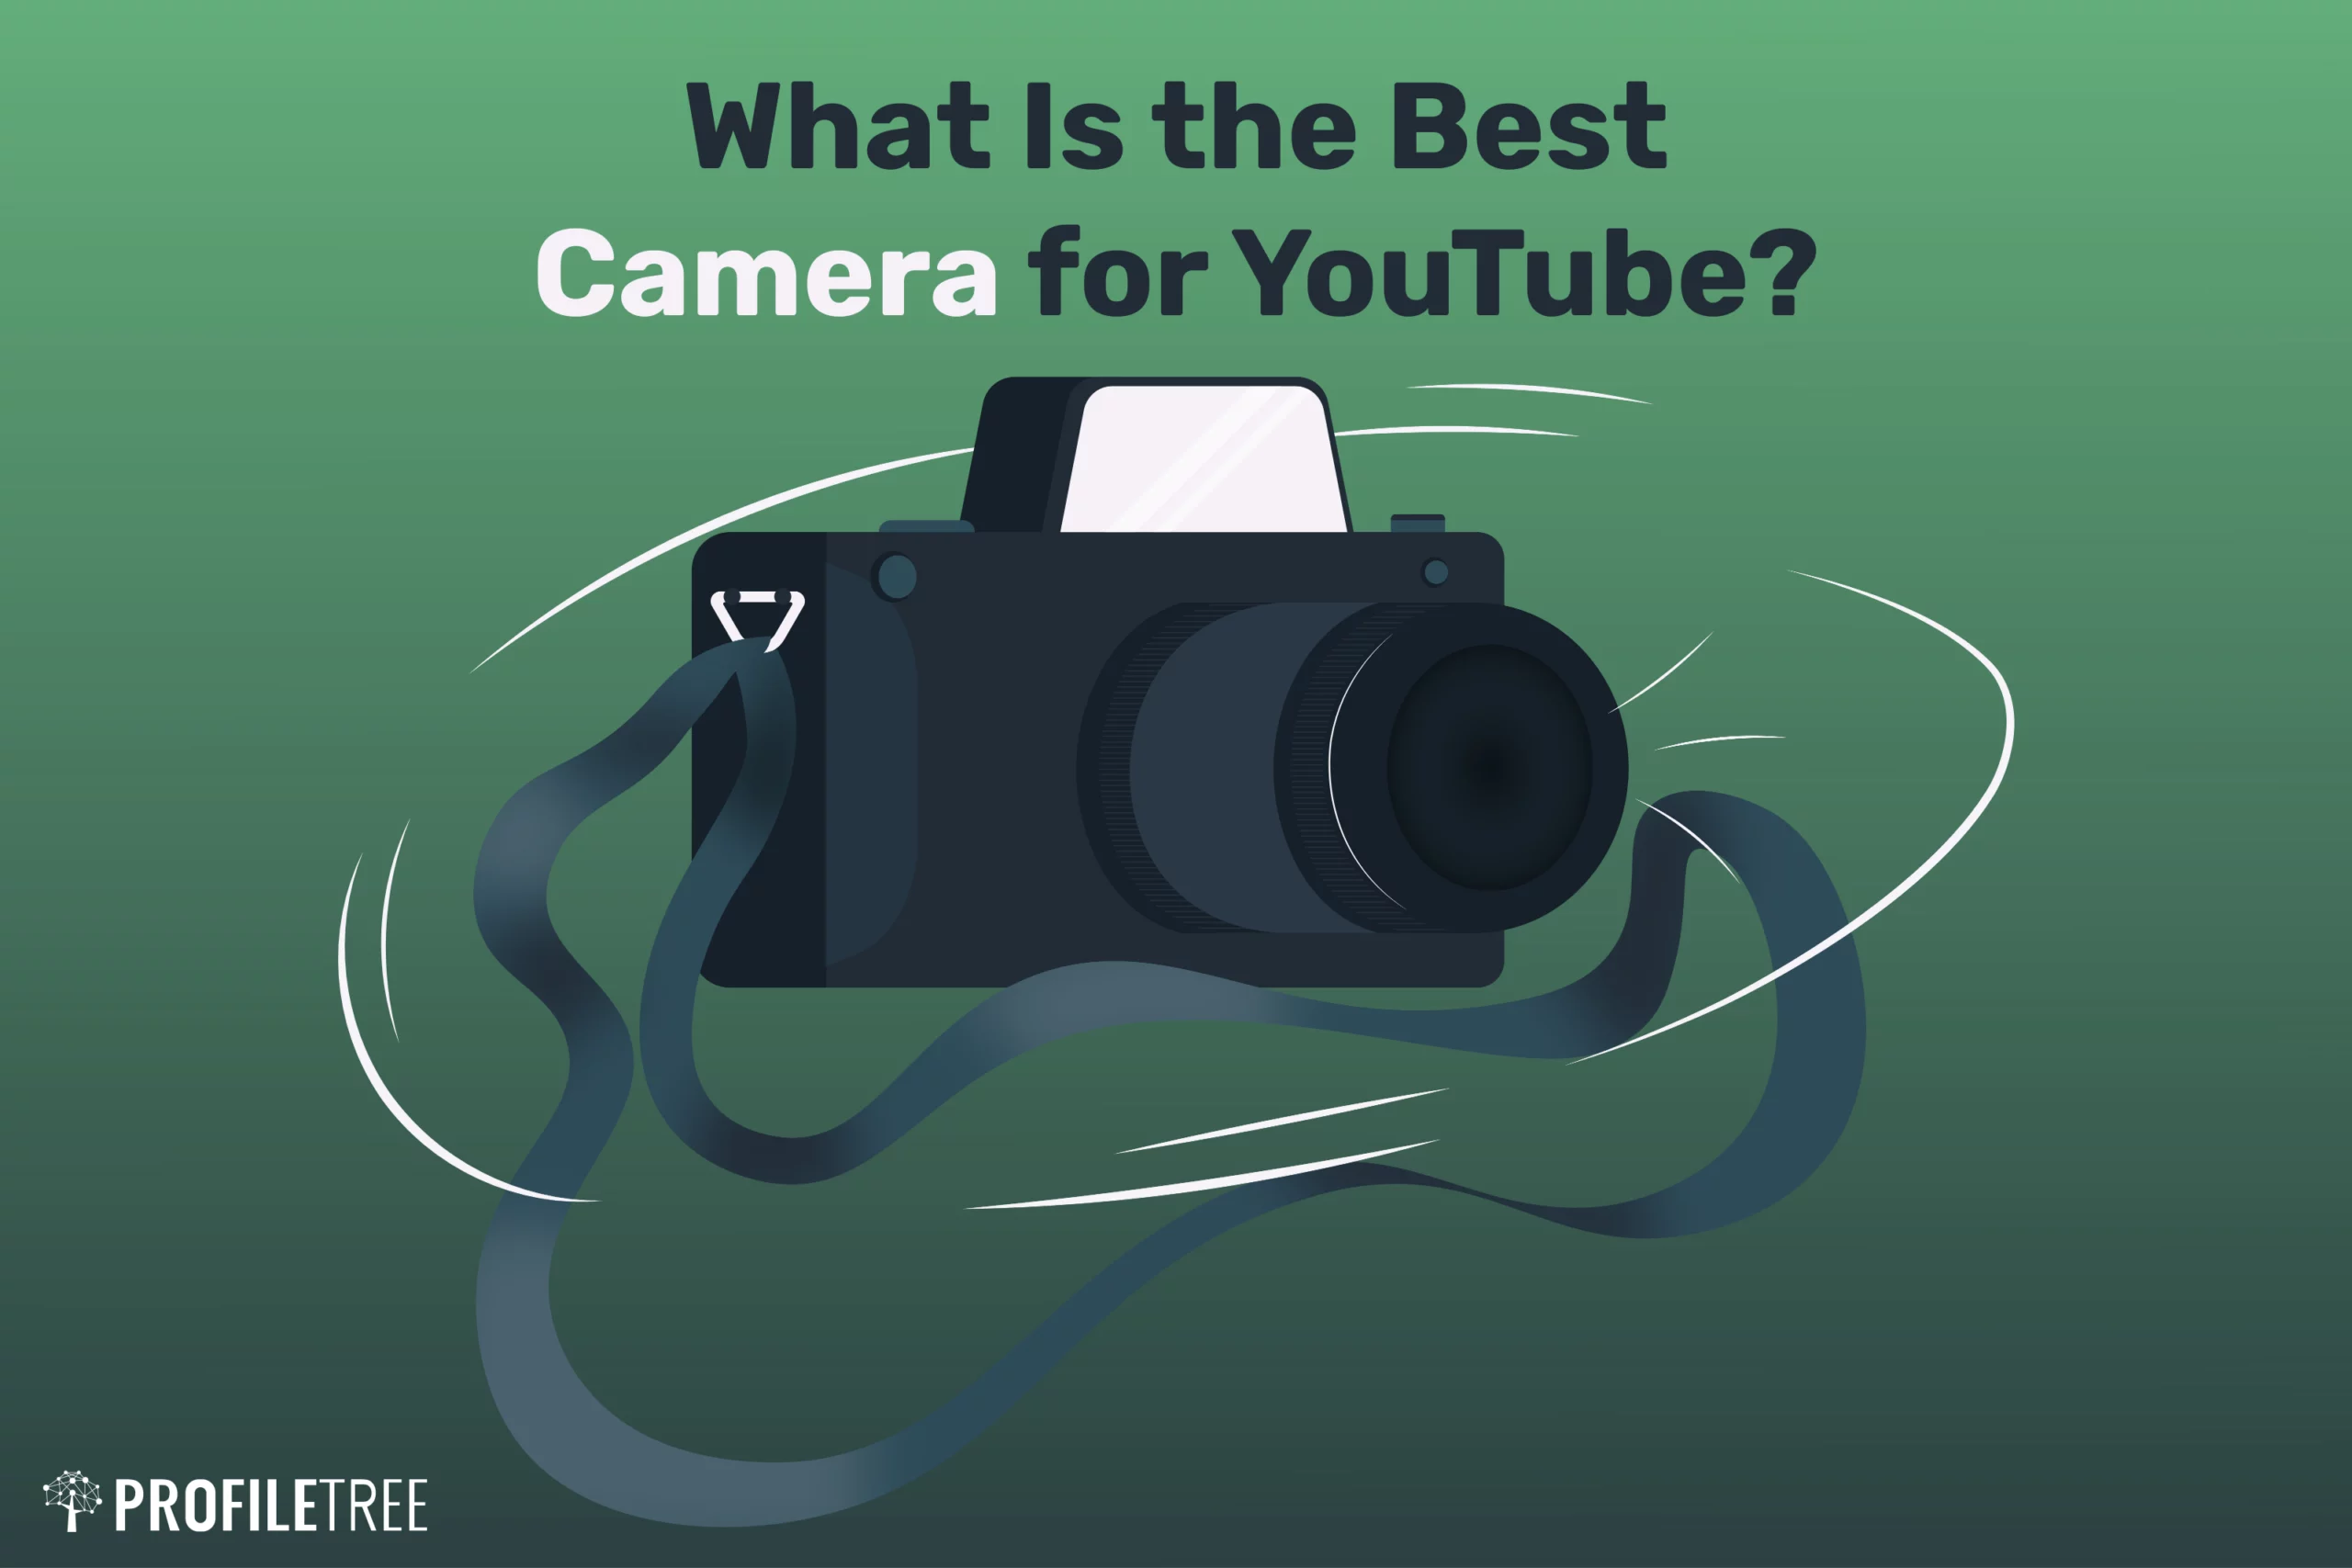 What Is the Best Camera for YouTube